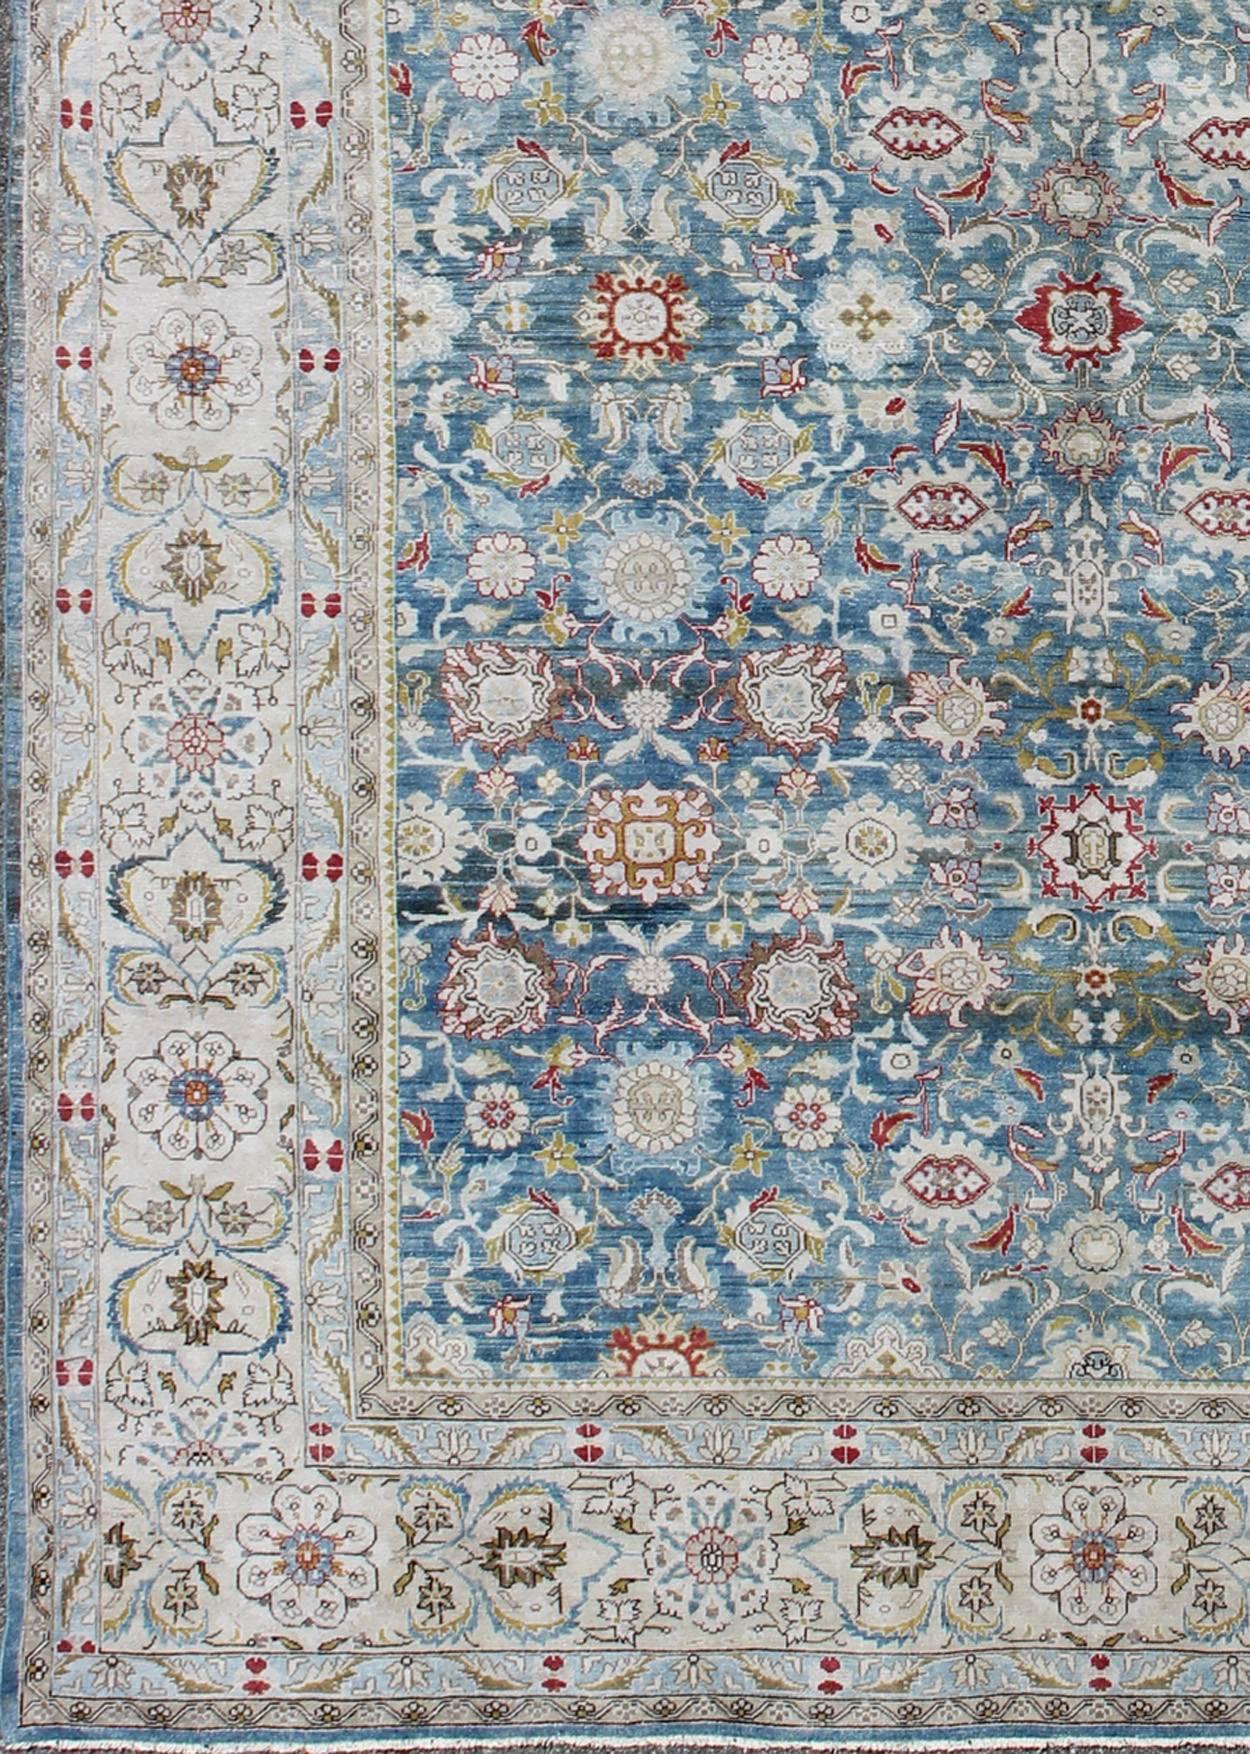 Colorful large antique blue gray background Persian Malayer rug with all-over floral pattern. Large antique blue background Persian Malayer rug with all-over floral pattern. Keivan Woven Arts / rug / EMA-7500, country of origin / type: Iran /